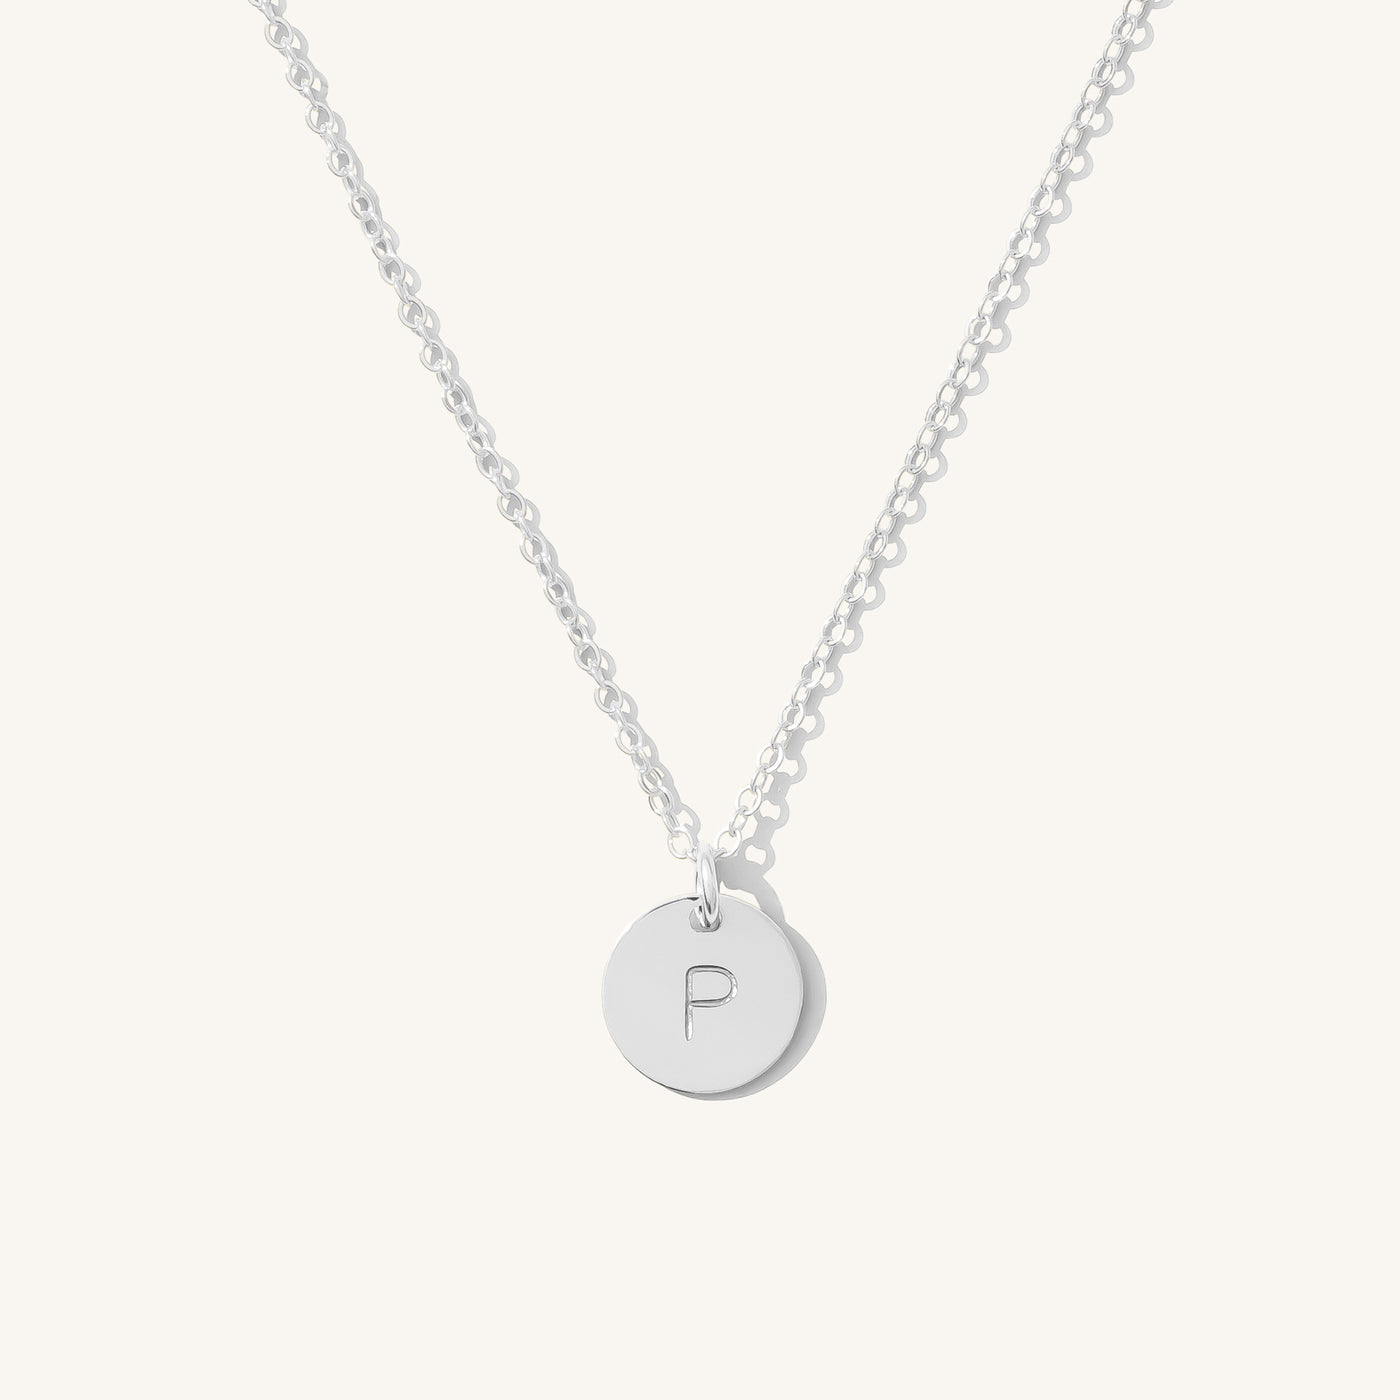 P Dainty Initial Necklace